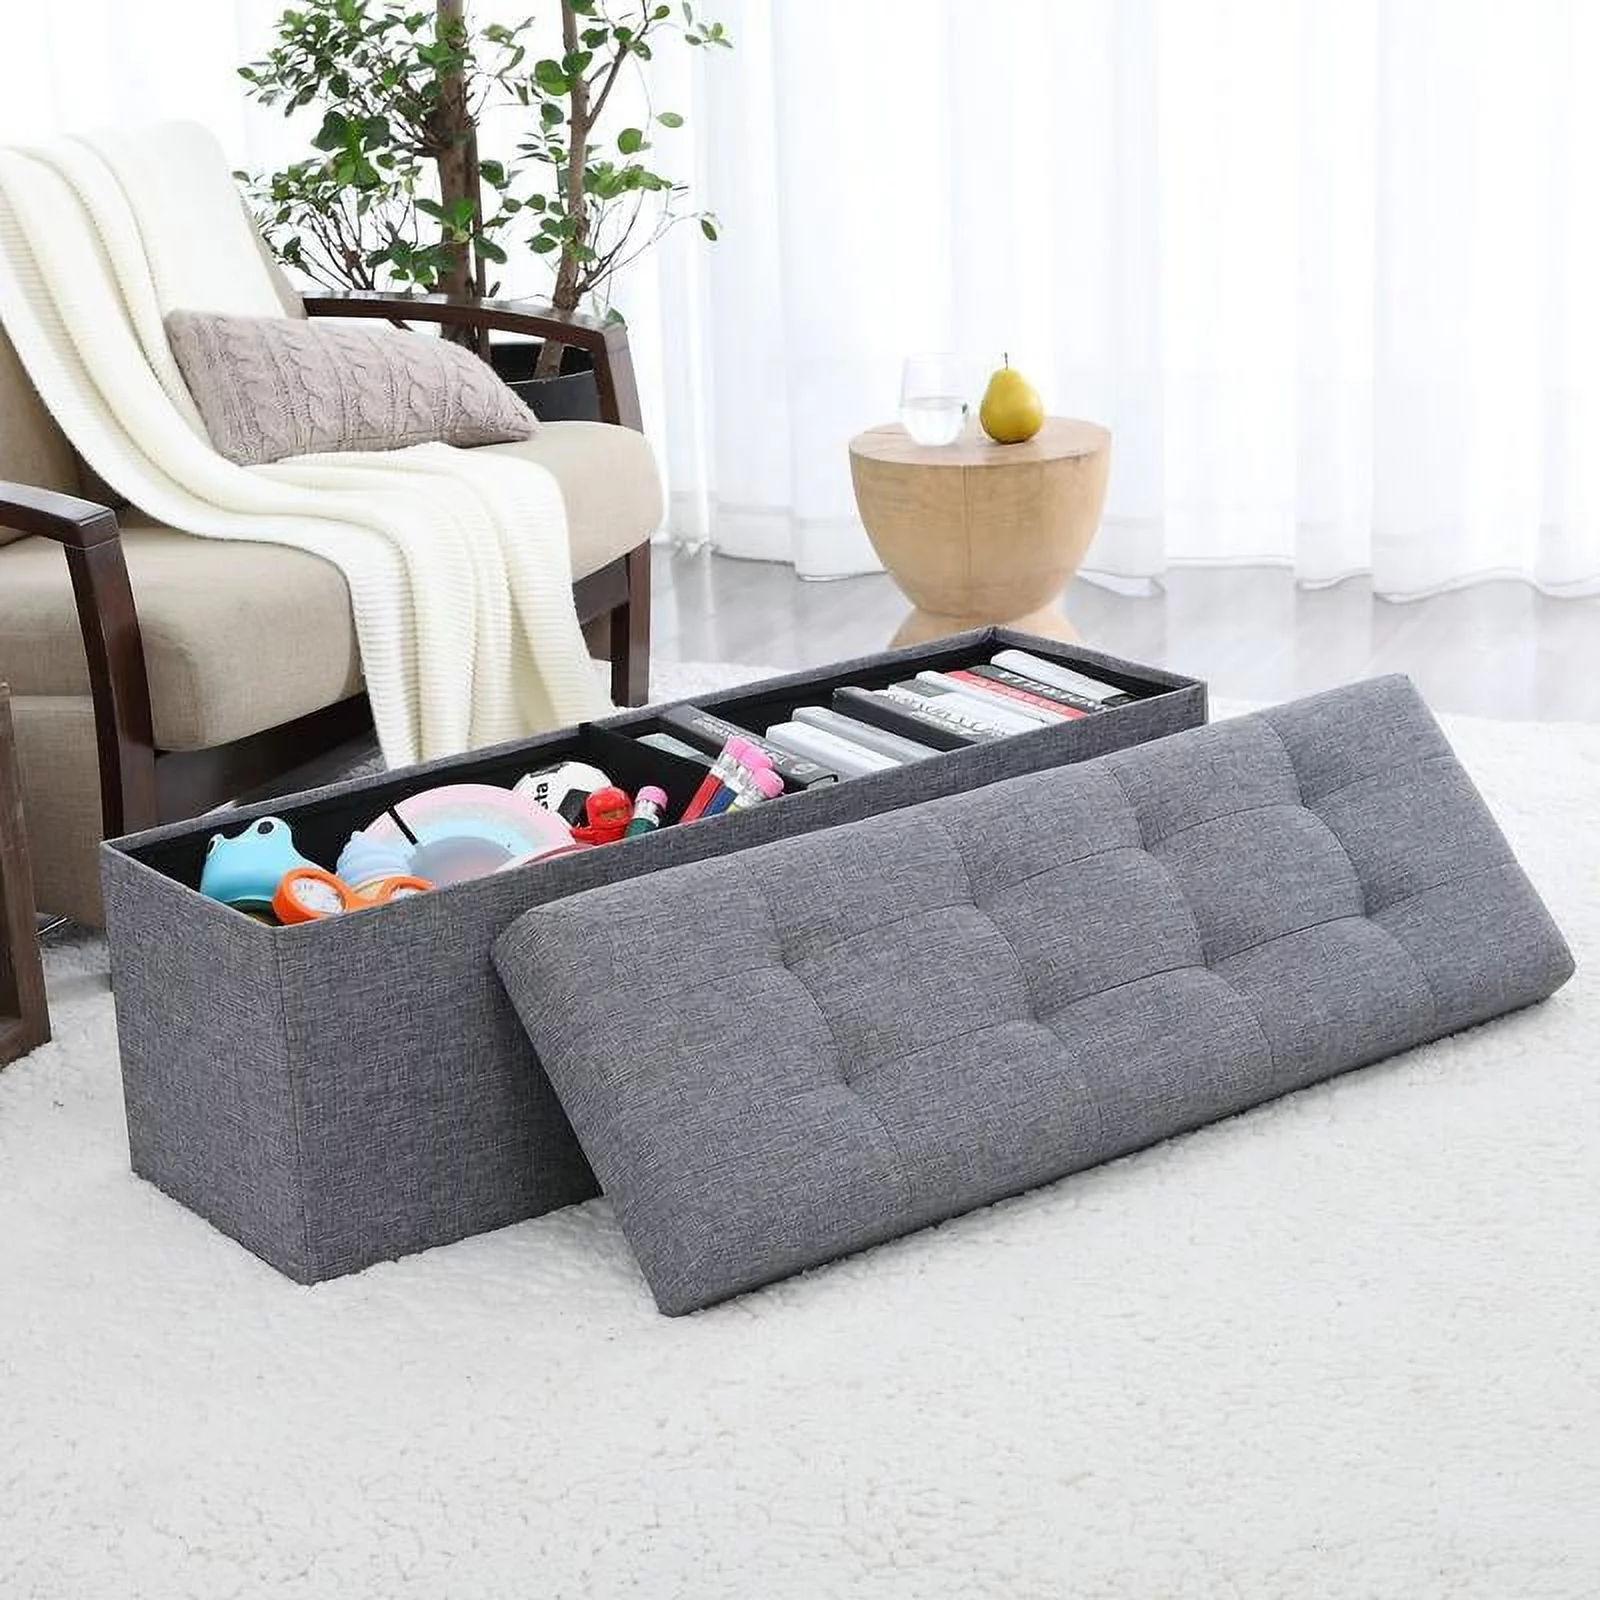 Ottoman works great as toy storage for living room